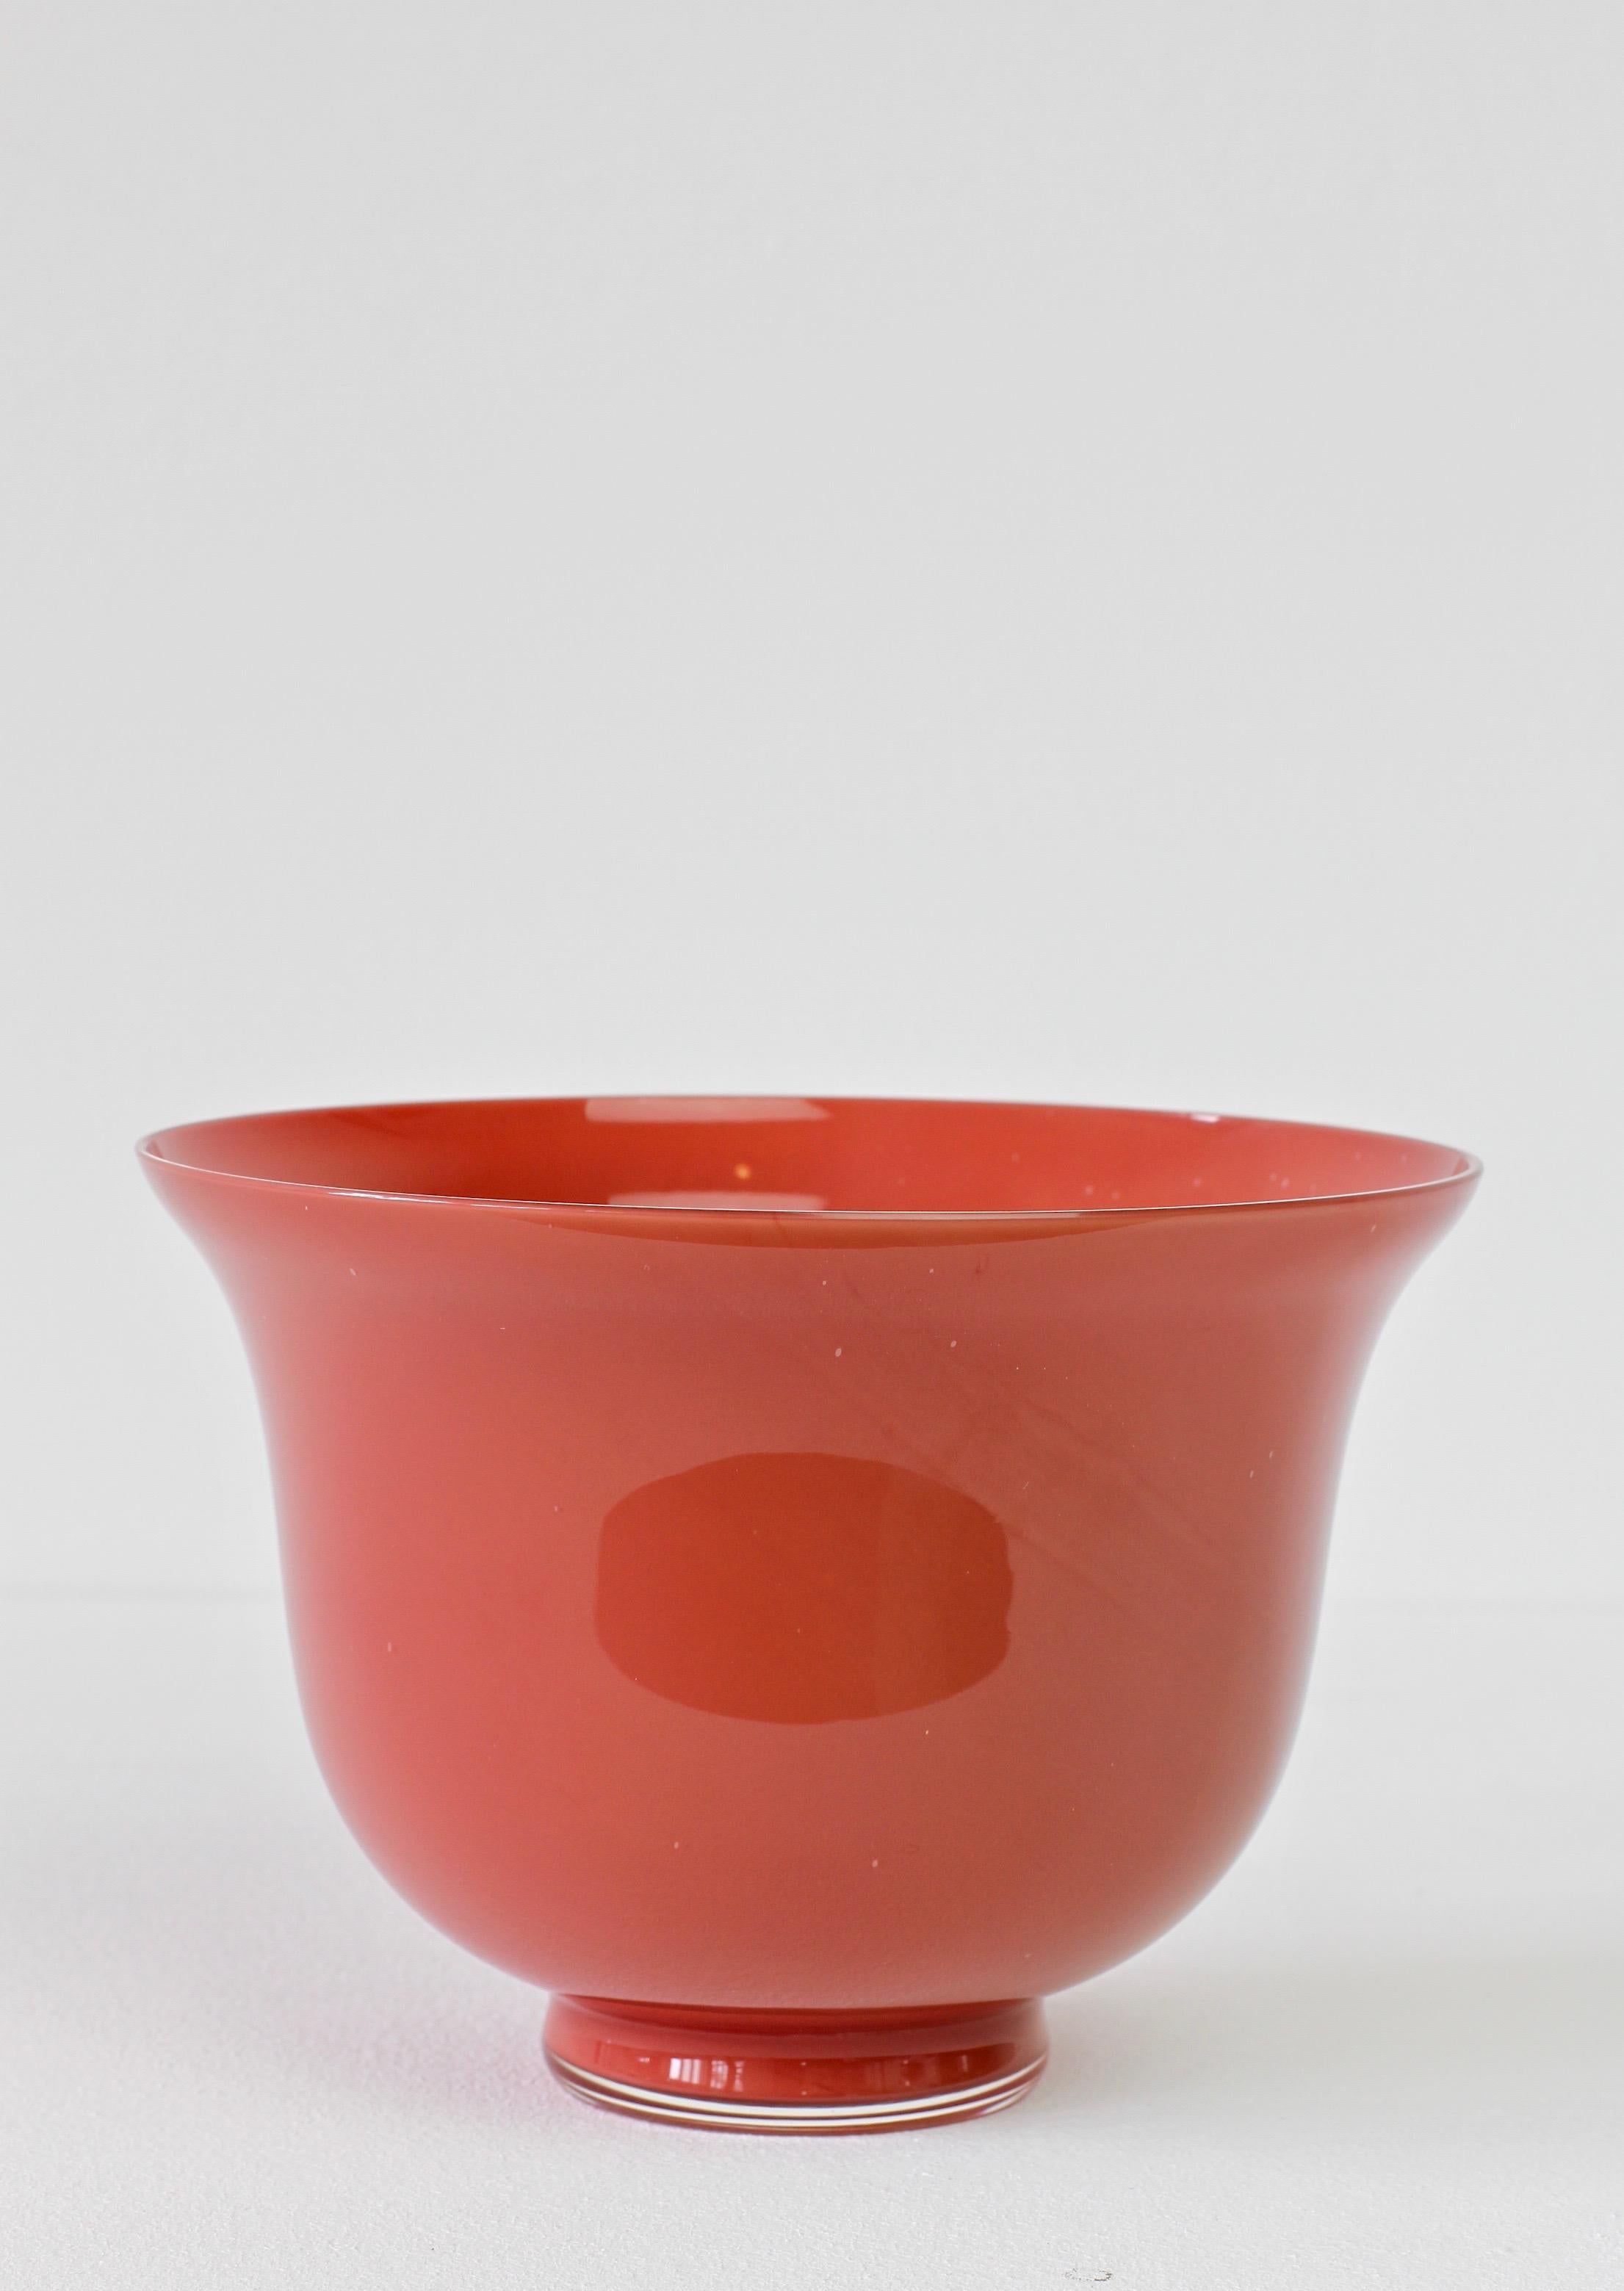 red glass vases and bowls